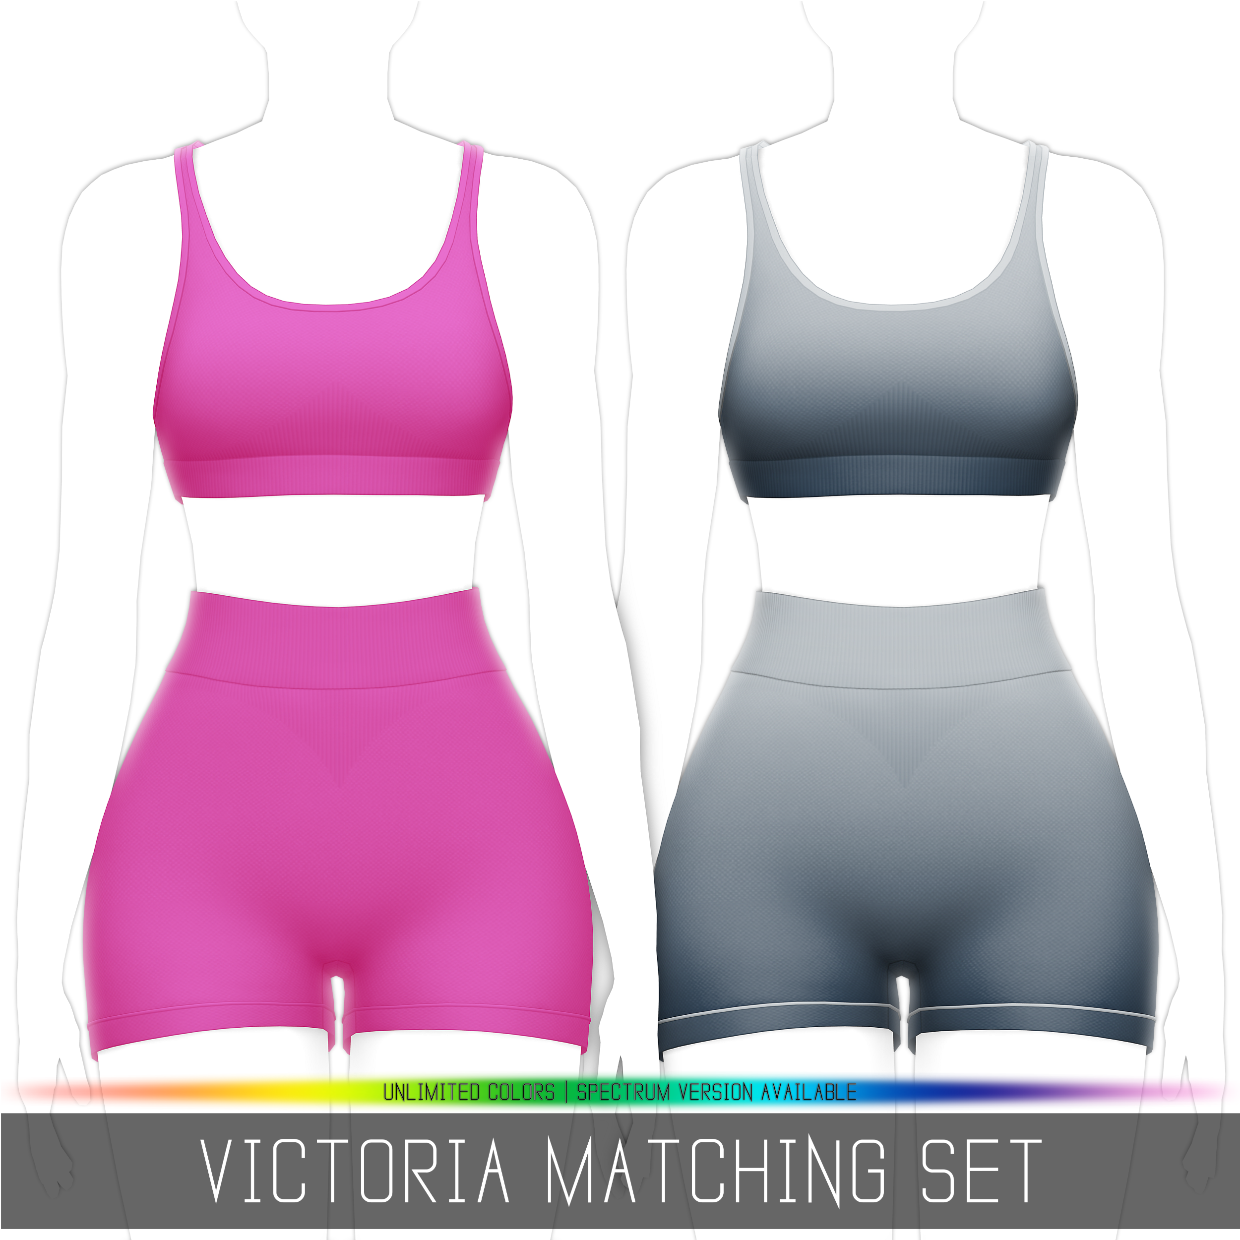 Simpliciaty's Victoria Matching Set - The Sims 4 Create a Sim